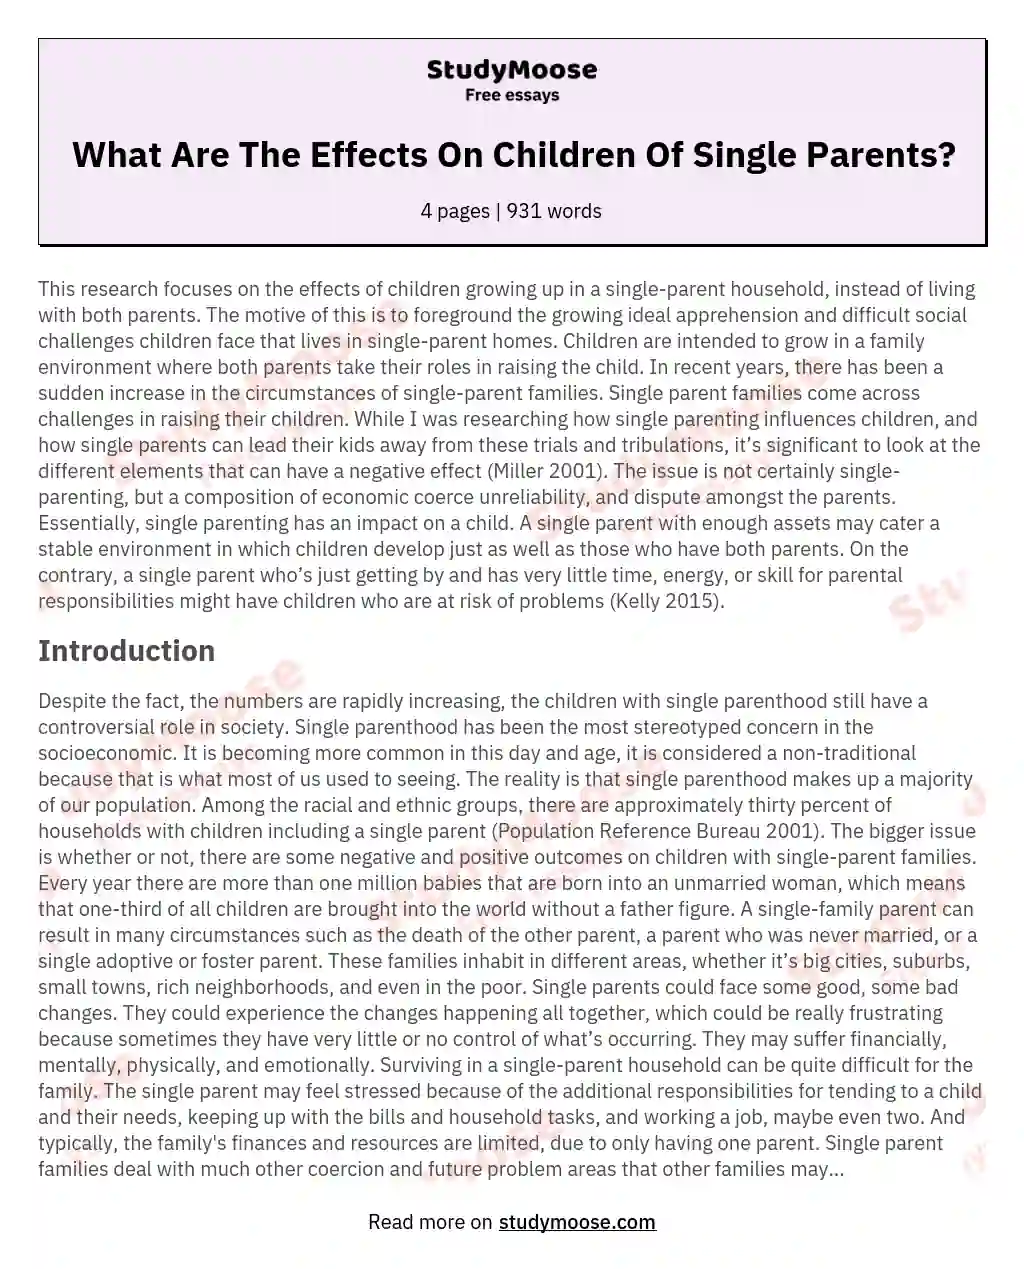 What Are The Effects On Children Of Single Parents?